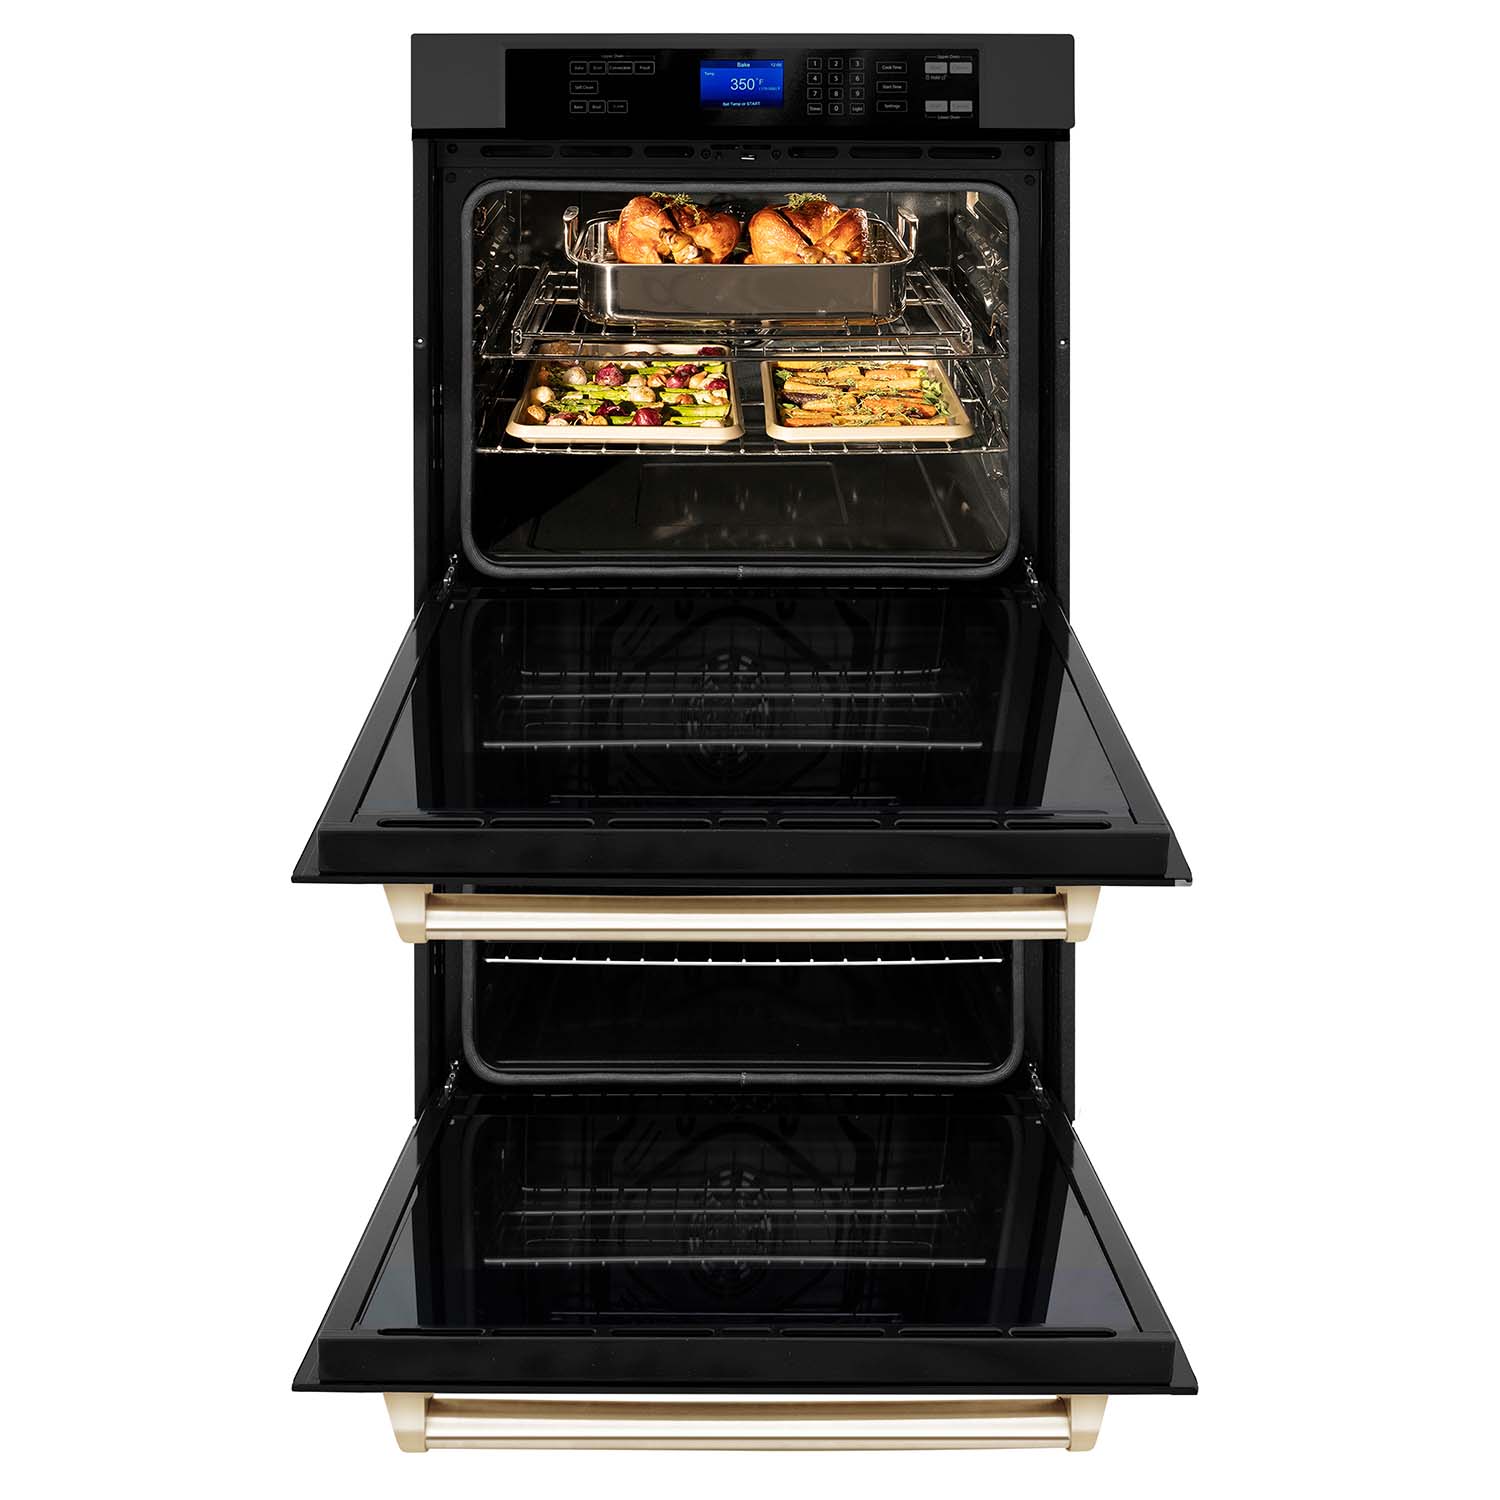 ZLINE 30" Autograph Edition Electric Double Wall Oven - Black Stainless Steel with Accents, Self Clean, True Convection